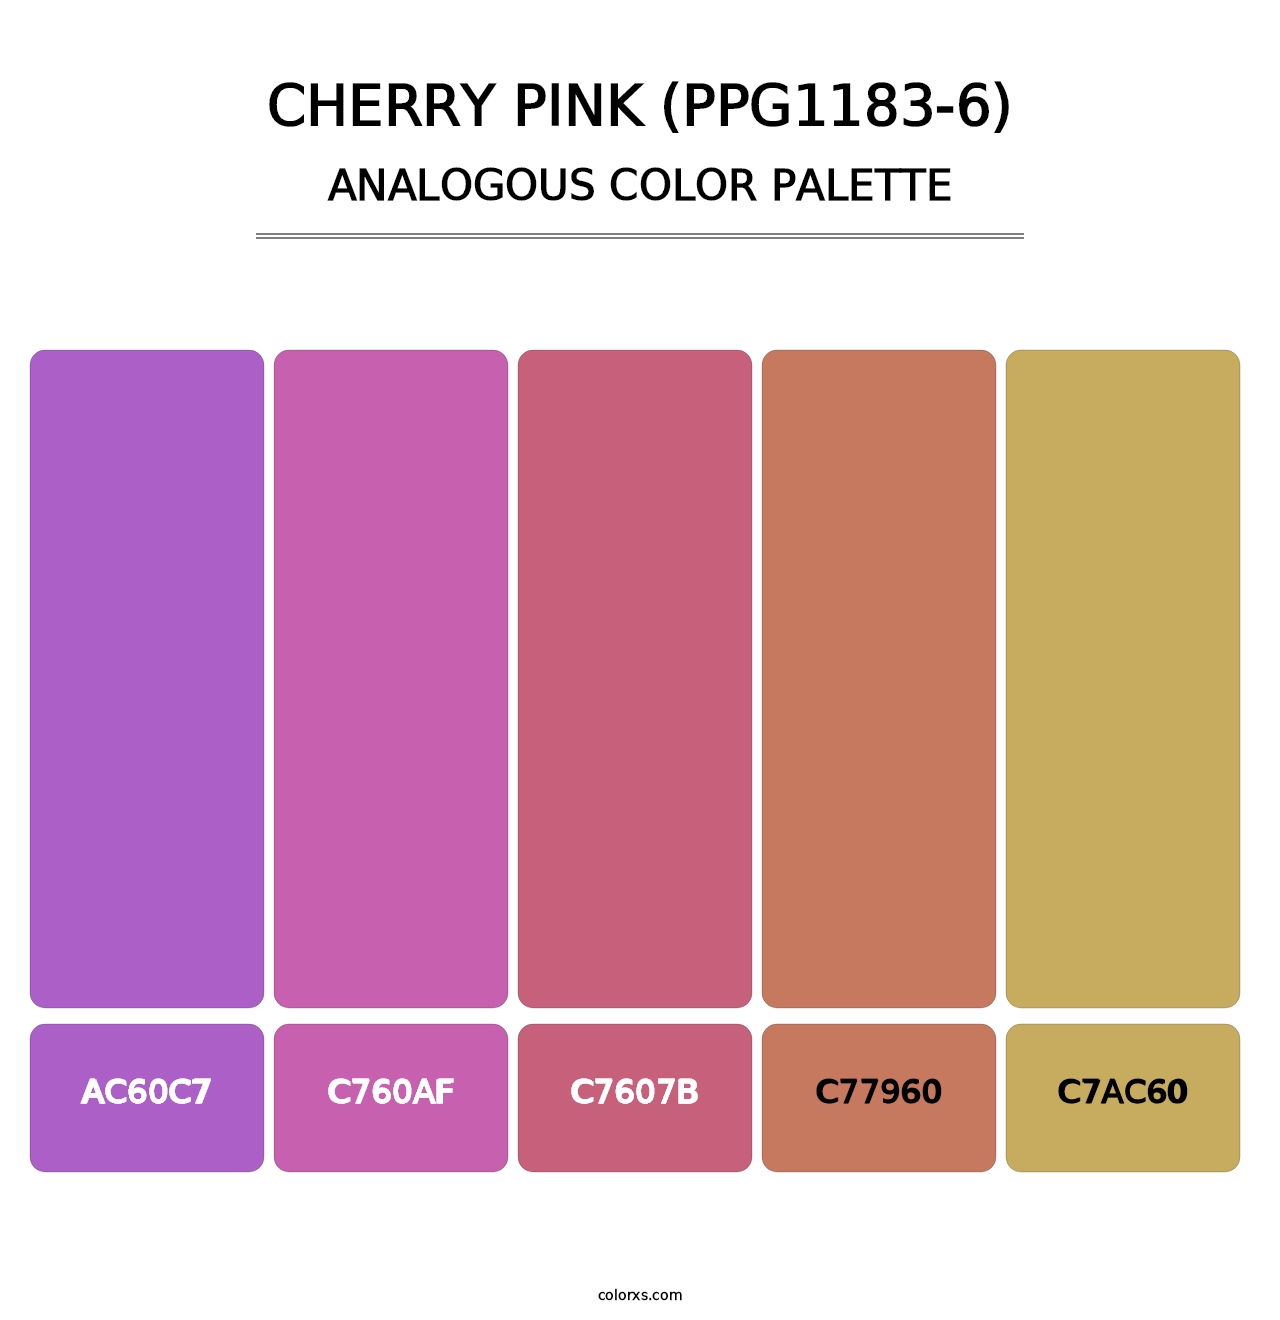 Cherry Pink (PPG1183-6) - Analogous Color Palette